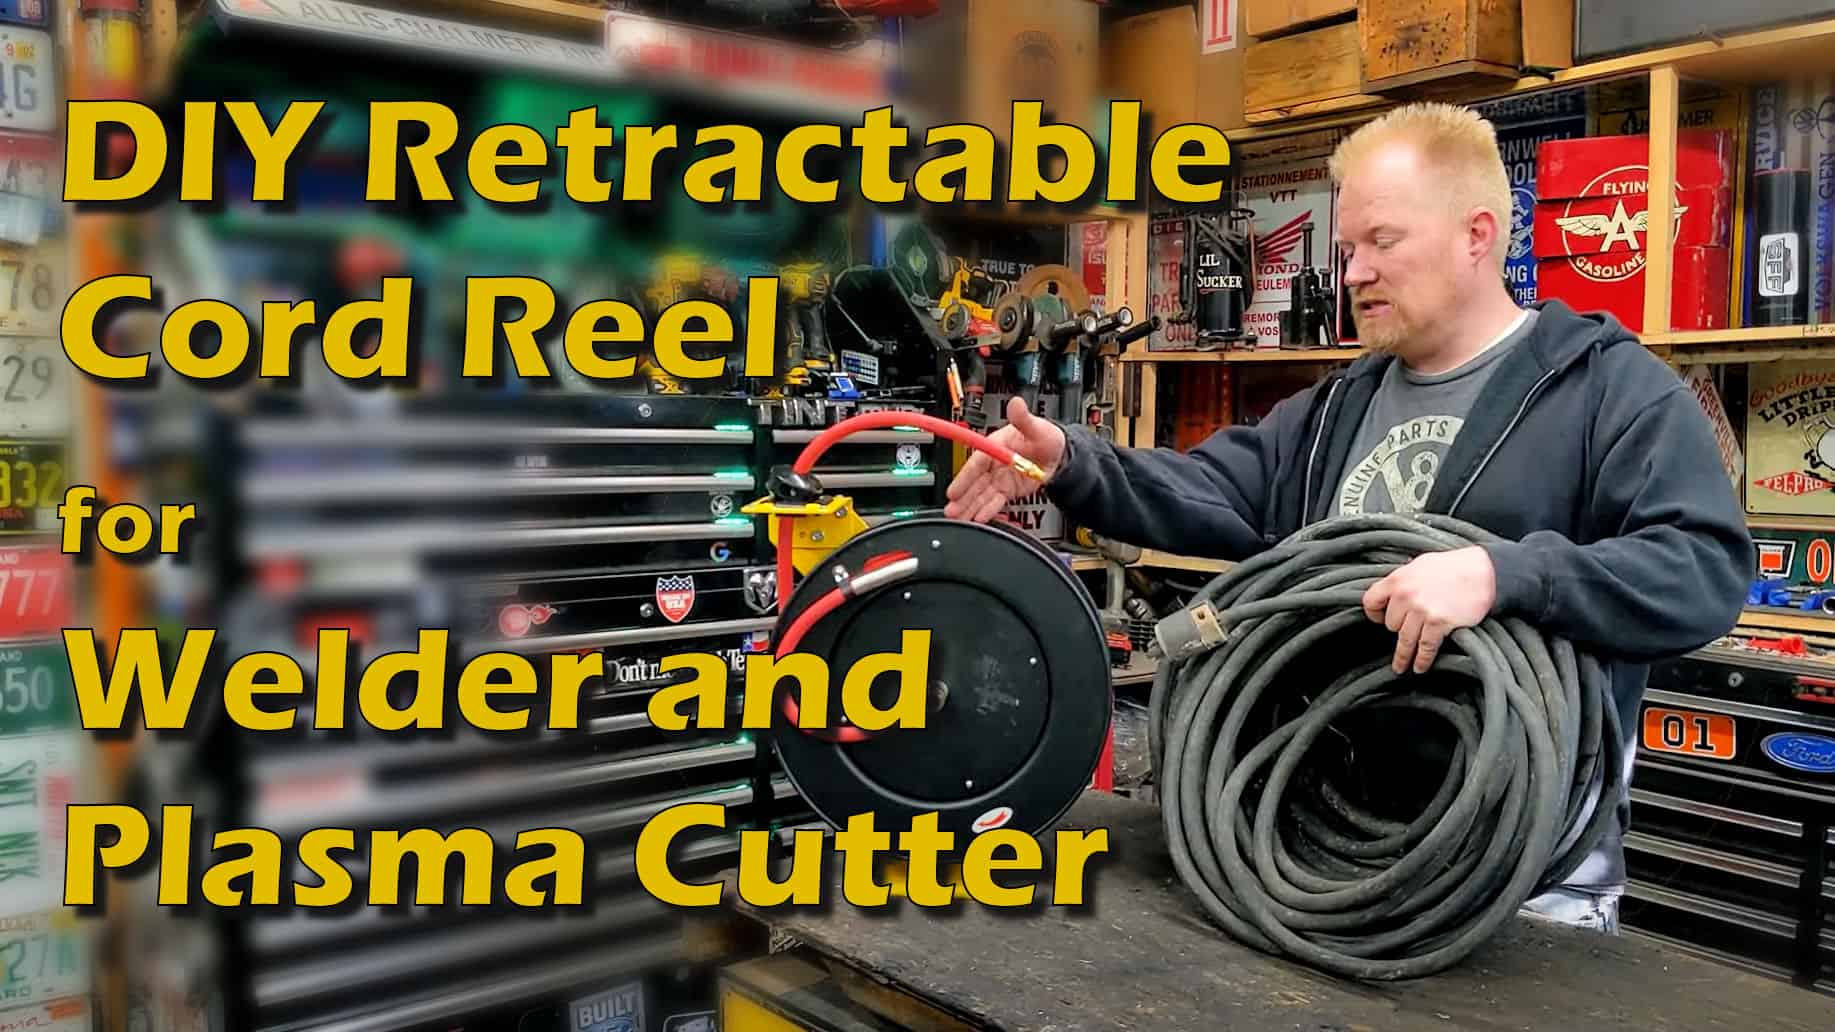 Harbor Freight Electric Extension Cord Reels Review and Use Demonstration 